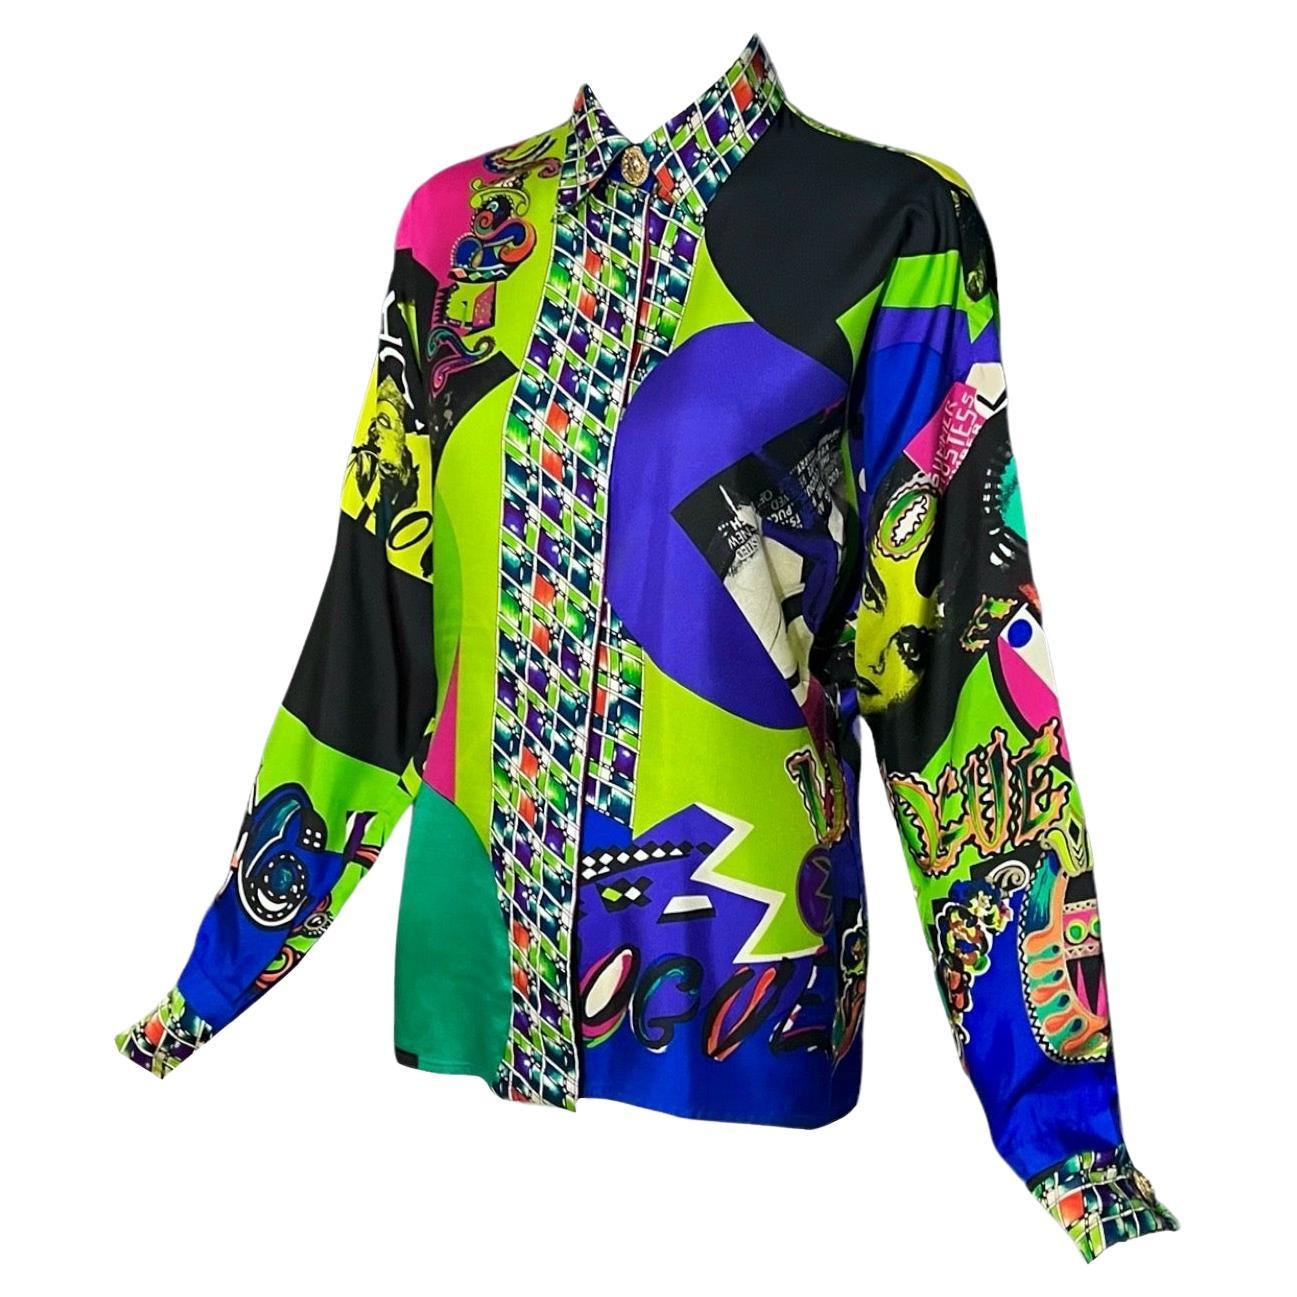 Gianni Versace Vogue vintage multicolored printed pop art shirt from the Spring 1991 collection.
Featuring the iconic Vogue print with Vogue magazine covers and 